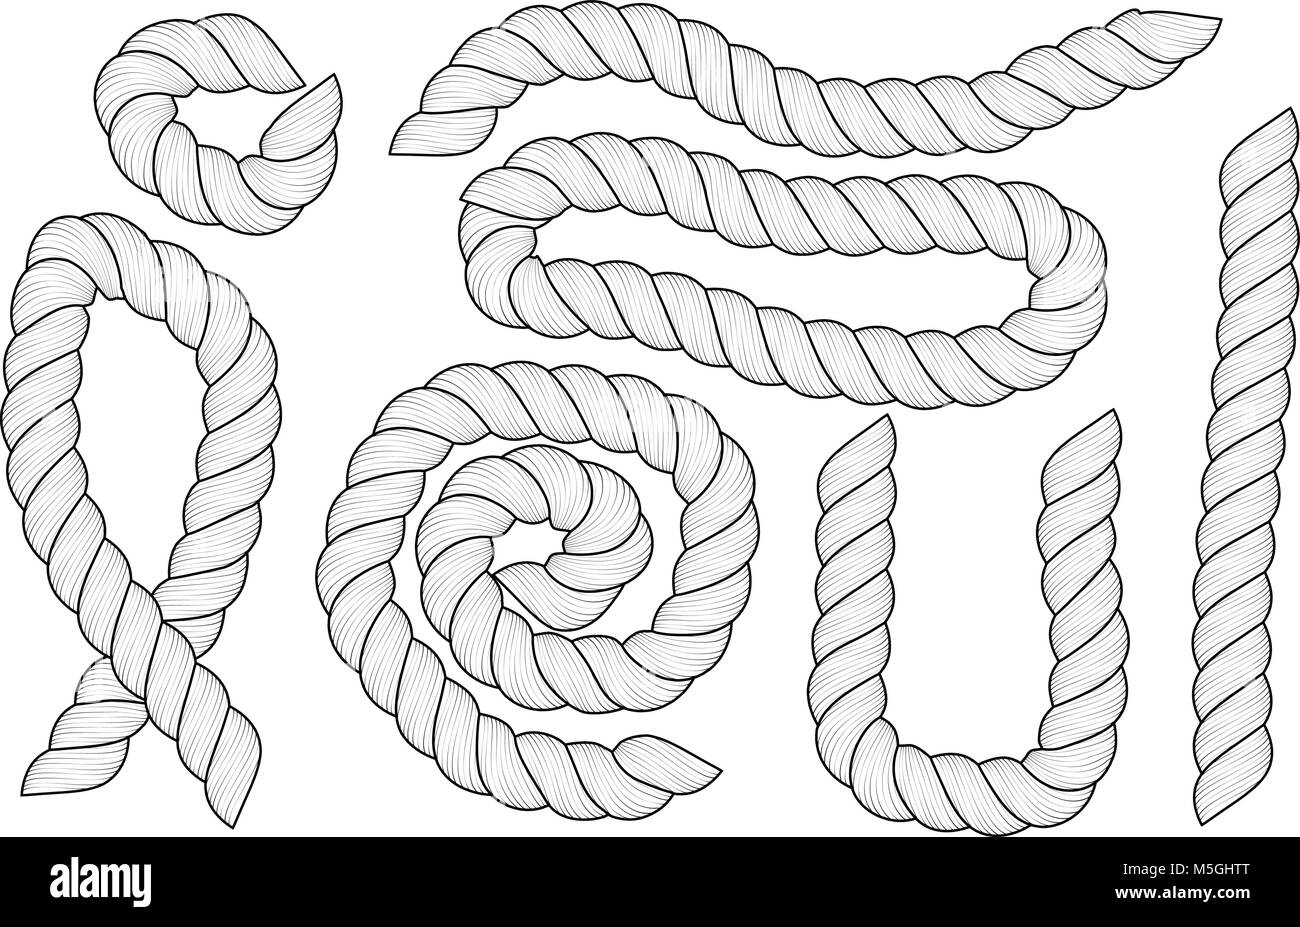 Set of different size and shapes white ropes are isolated on white background. Stock Vector